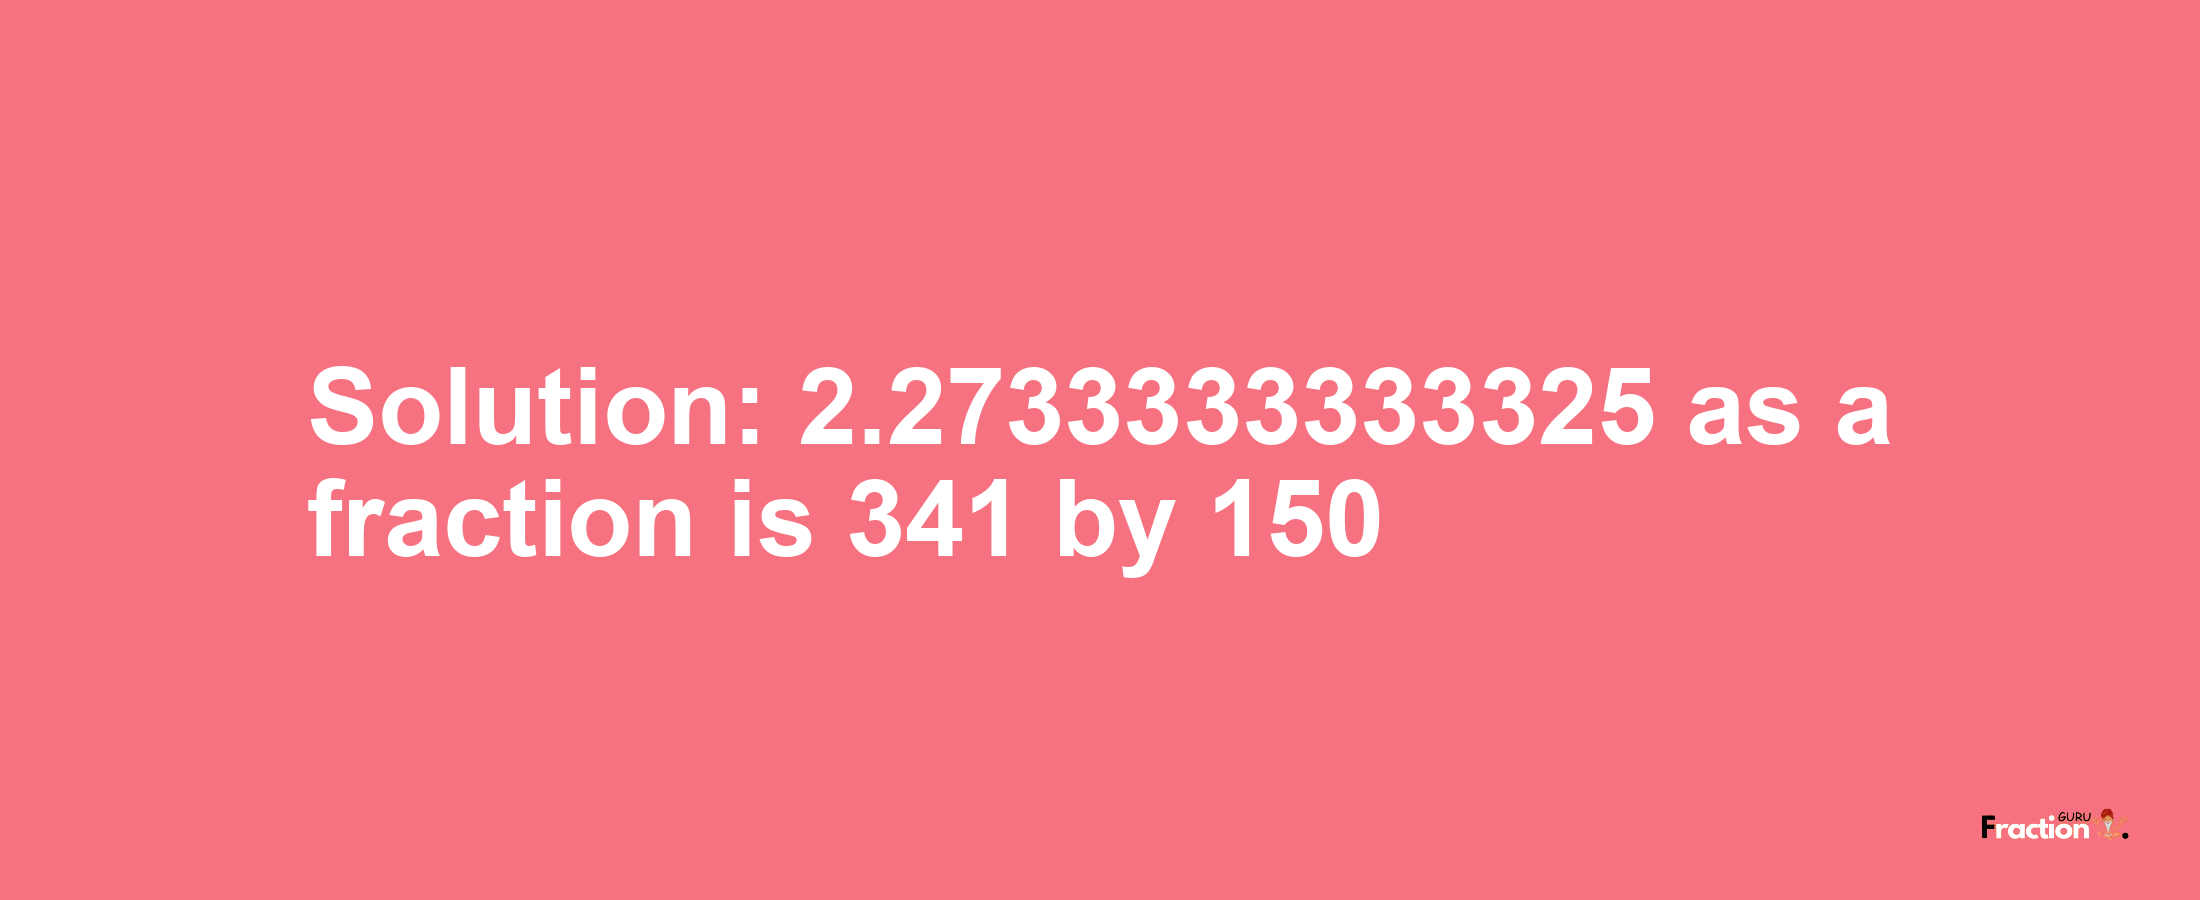 Solution:2.2733333333325 as a fraction is 341/150